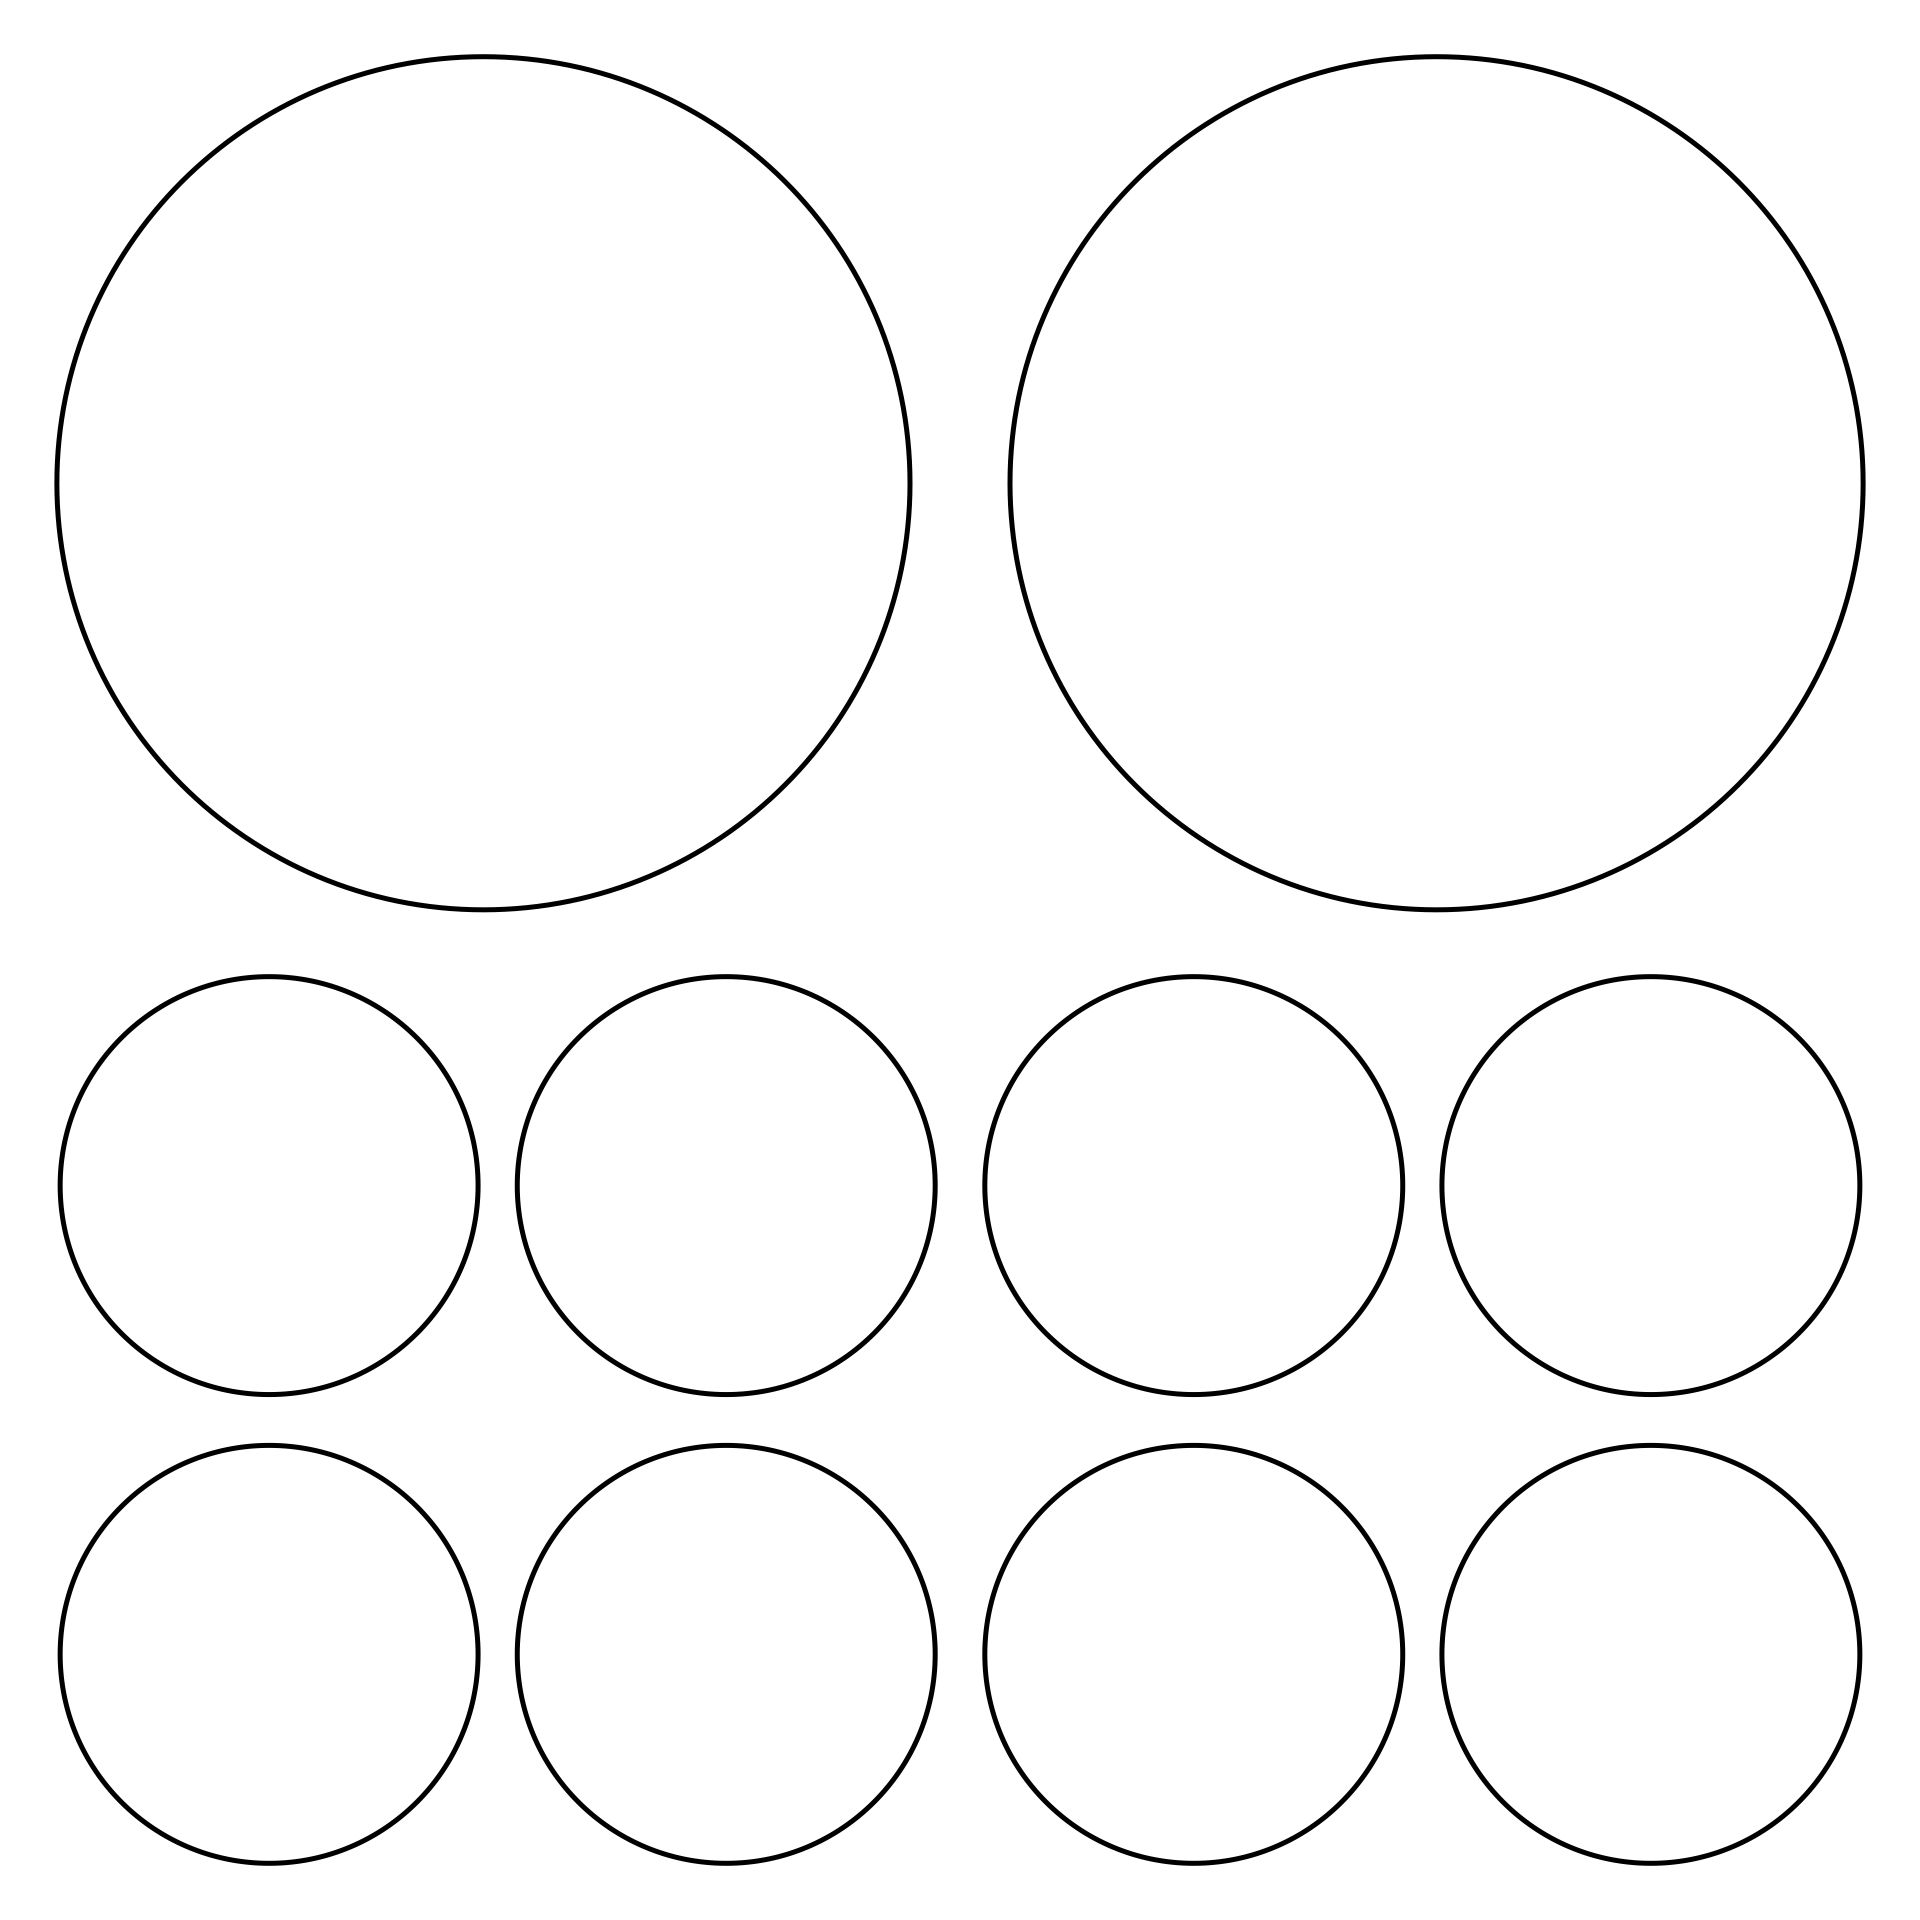 5 Best 6.5 Inch Circle Template Printable PDF for Free at Printablee